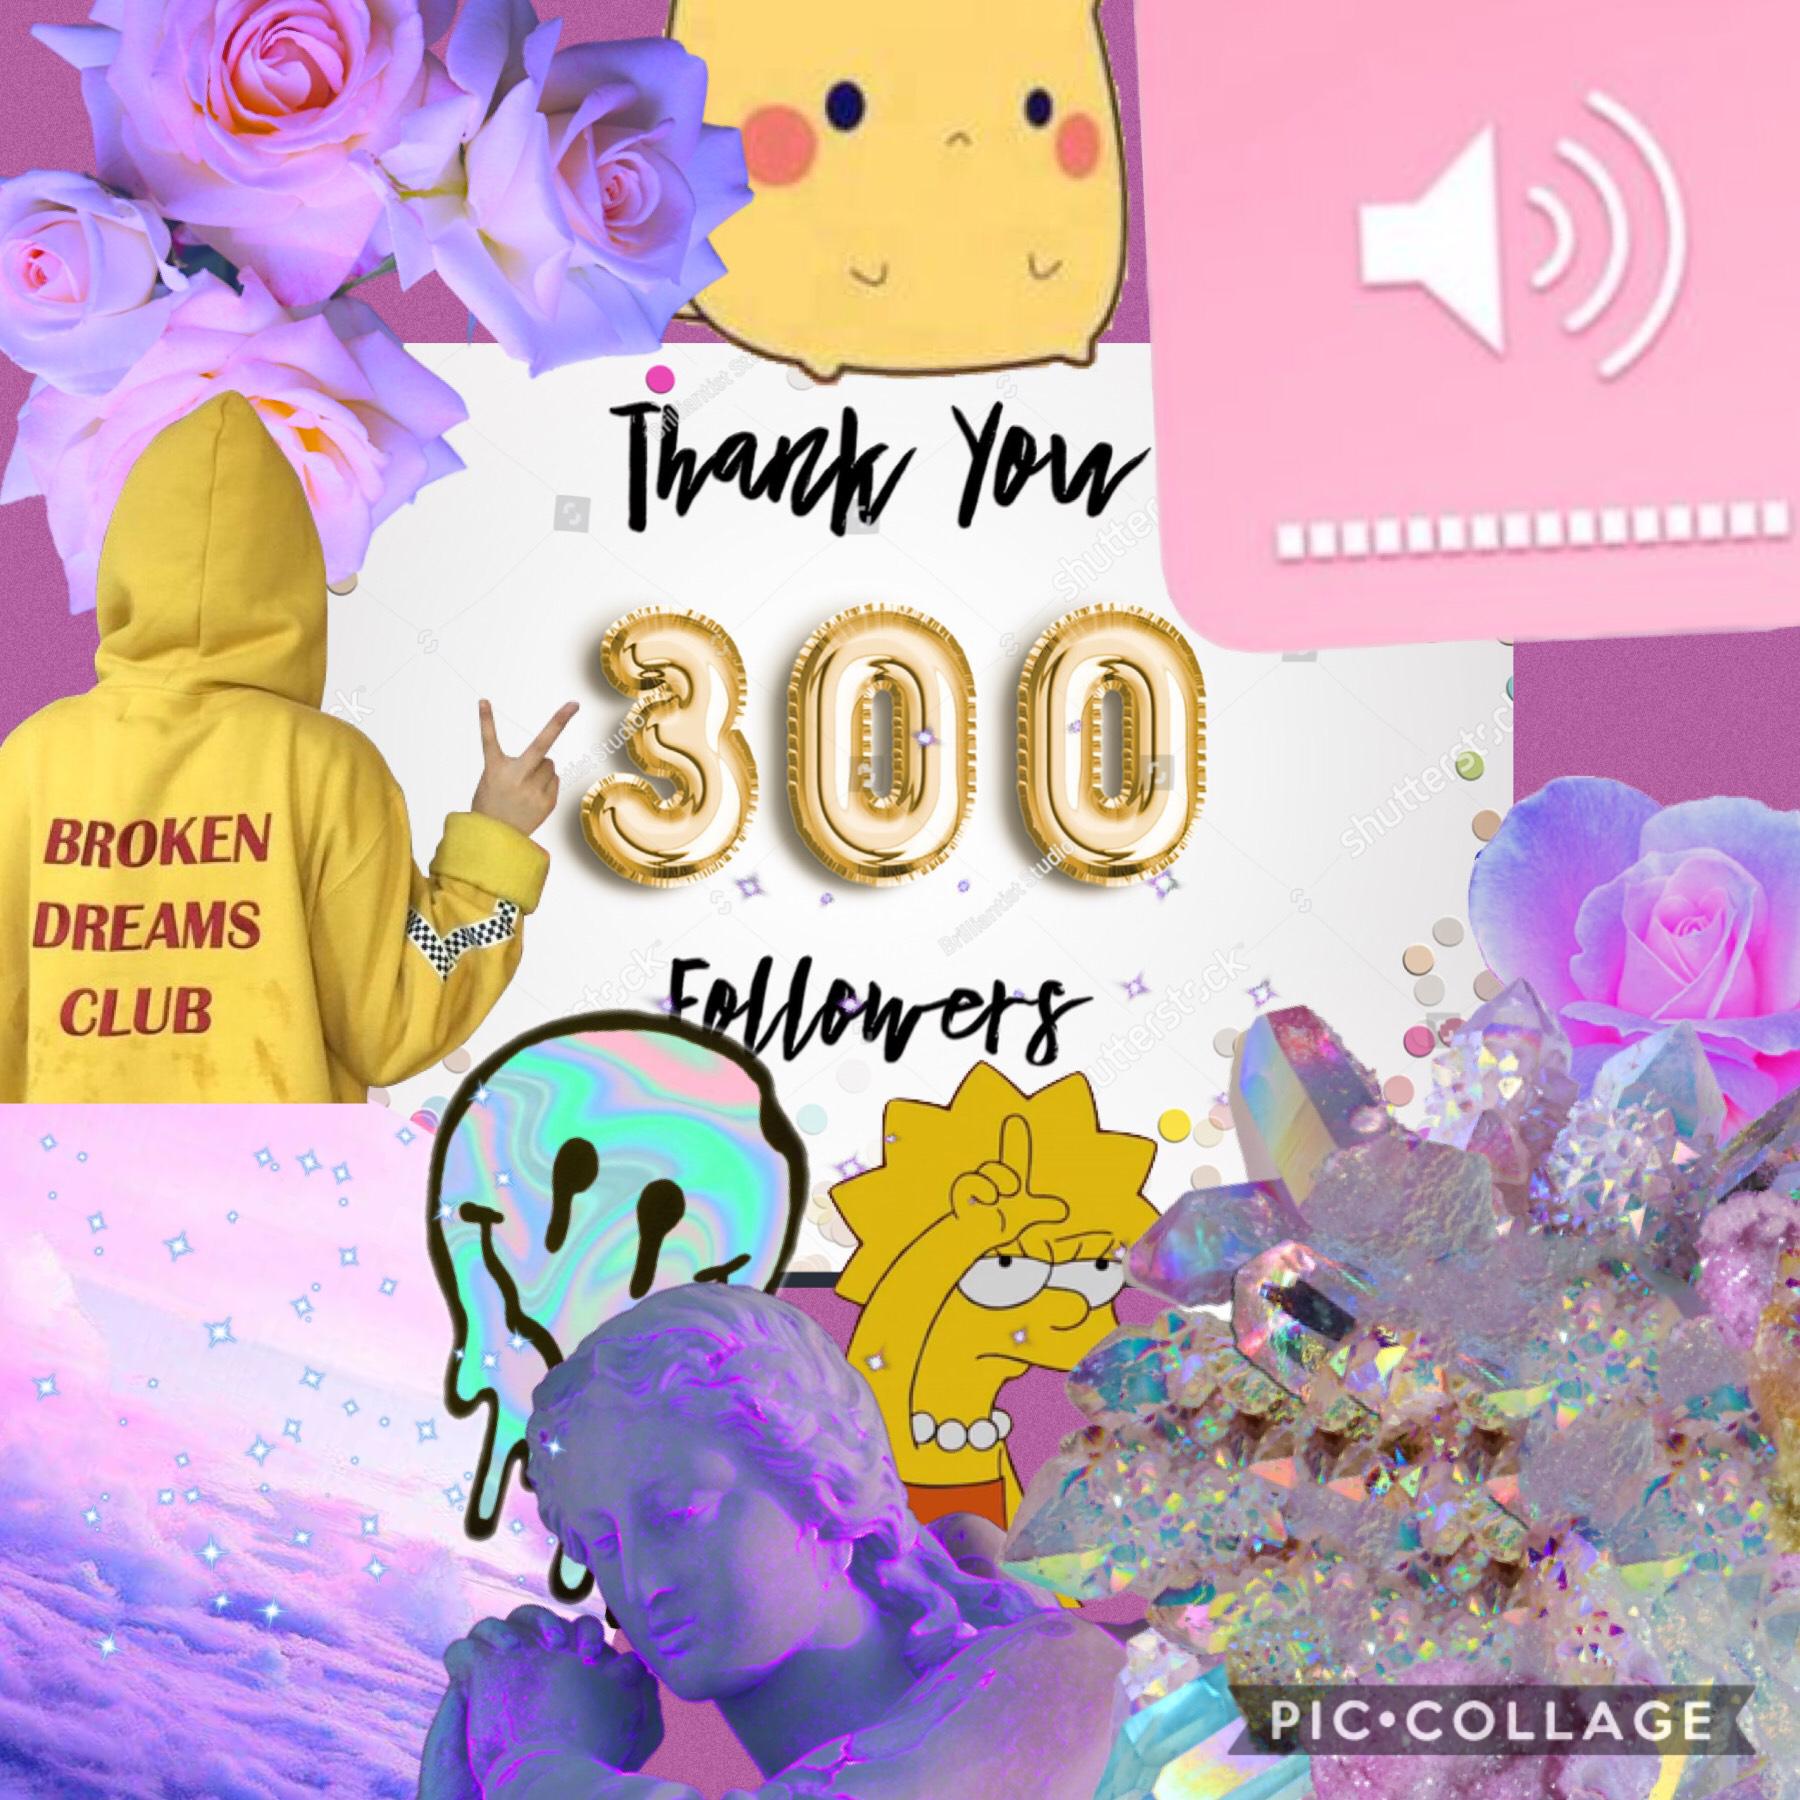 Thank you SO MUCH!!!!